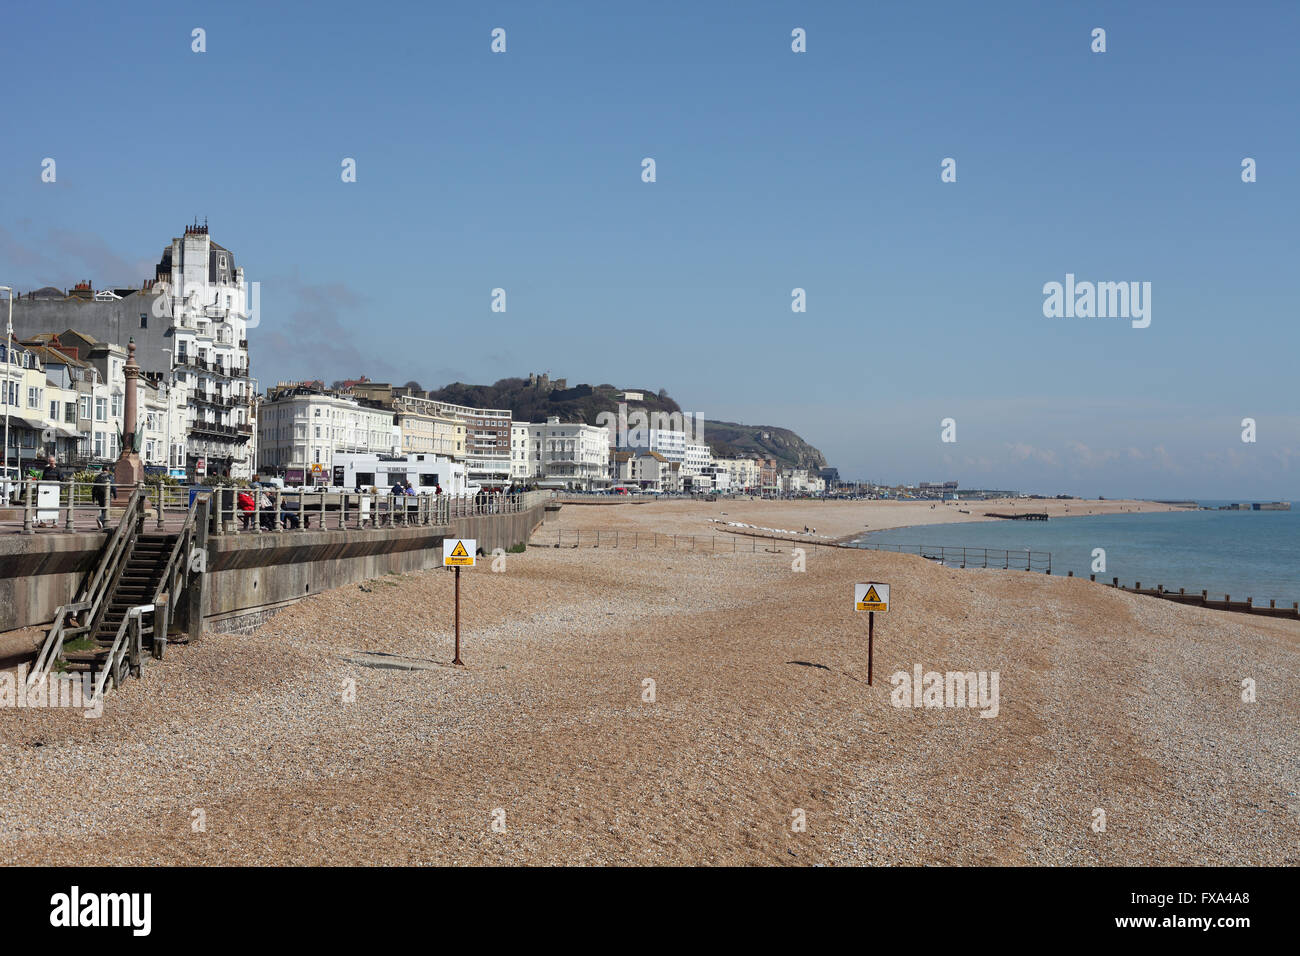 Hastings seafront and beach viewed from the restored pier looking eastward,  East Sussex, UK Stock Photo